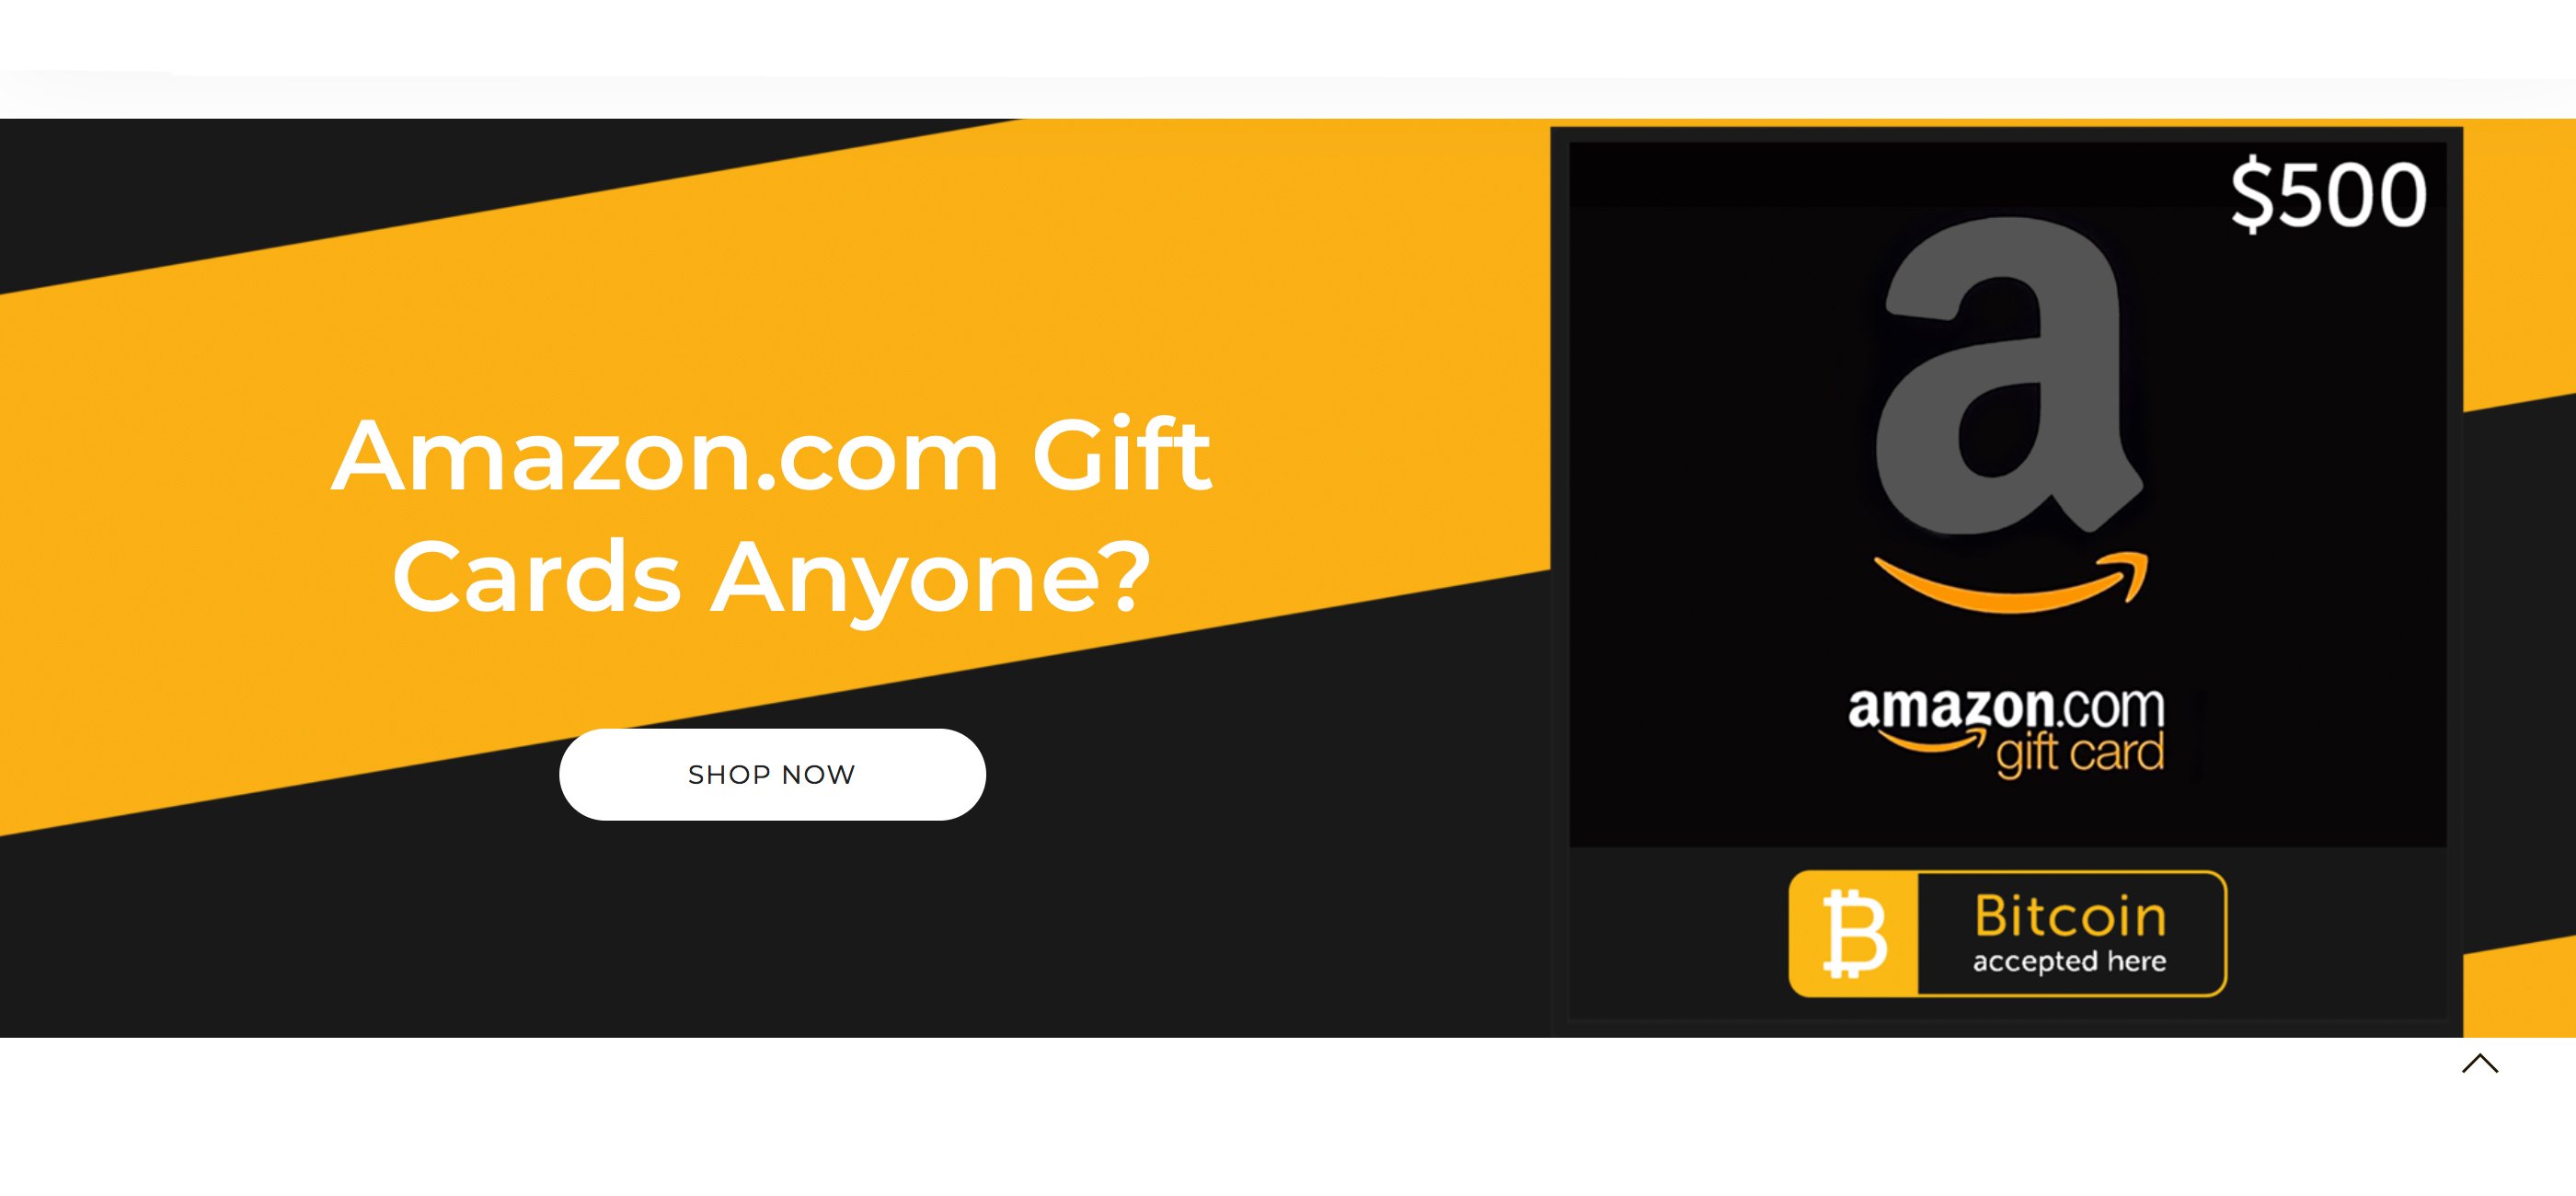 Bitcoin.com Store Adds More Hot New Items and Amazon Gift Cards